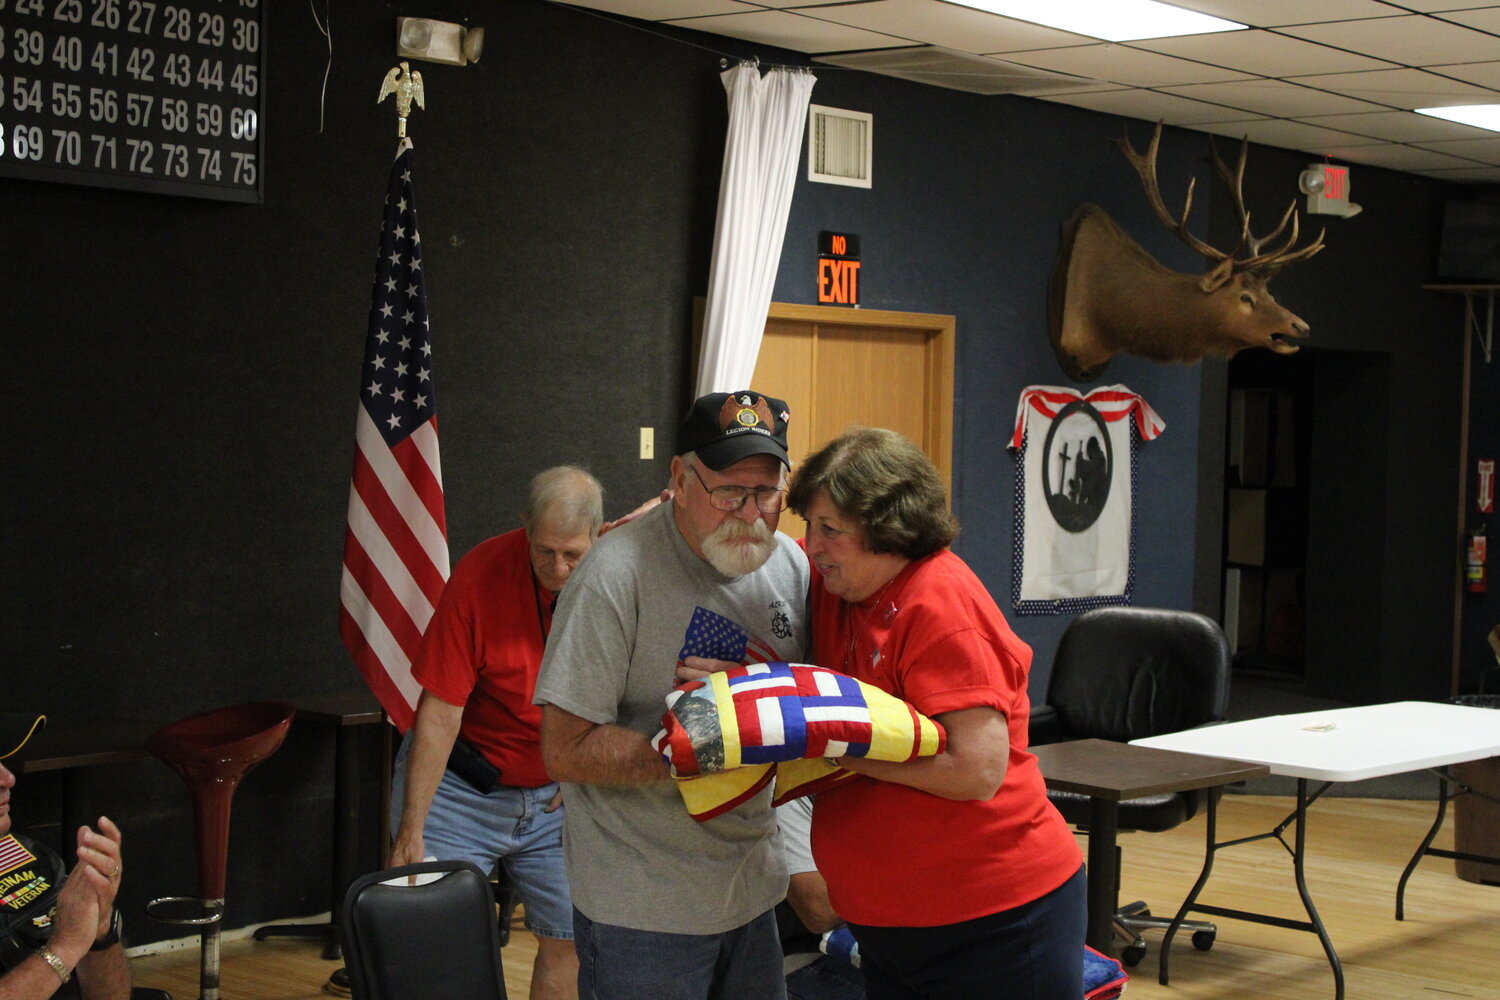 Warrenton veteran Rob Miller gets a hug from Marlene Walton as she presents him with his handmade quilt.